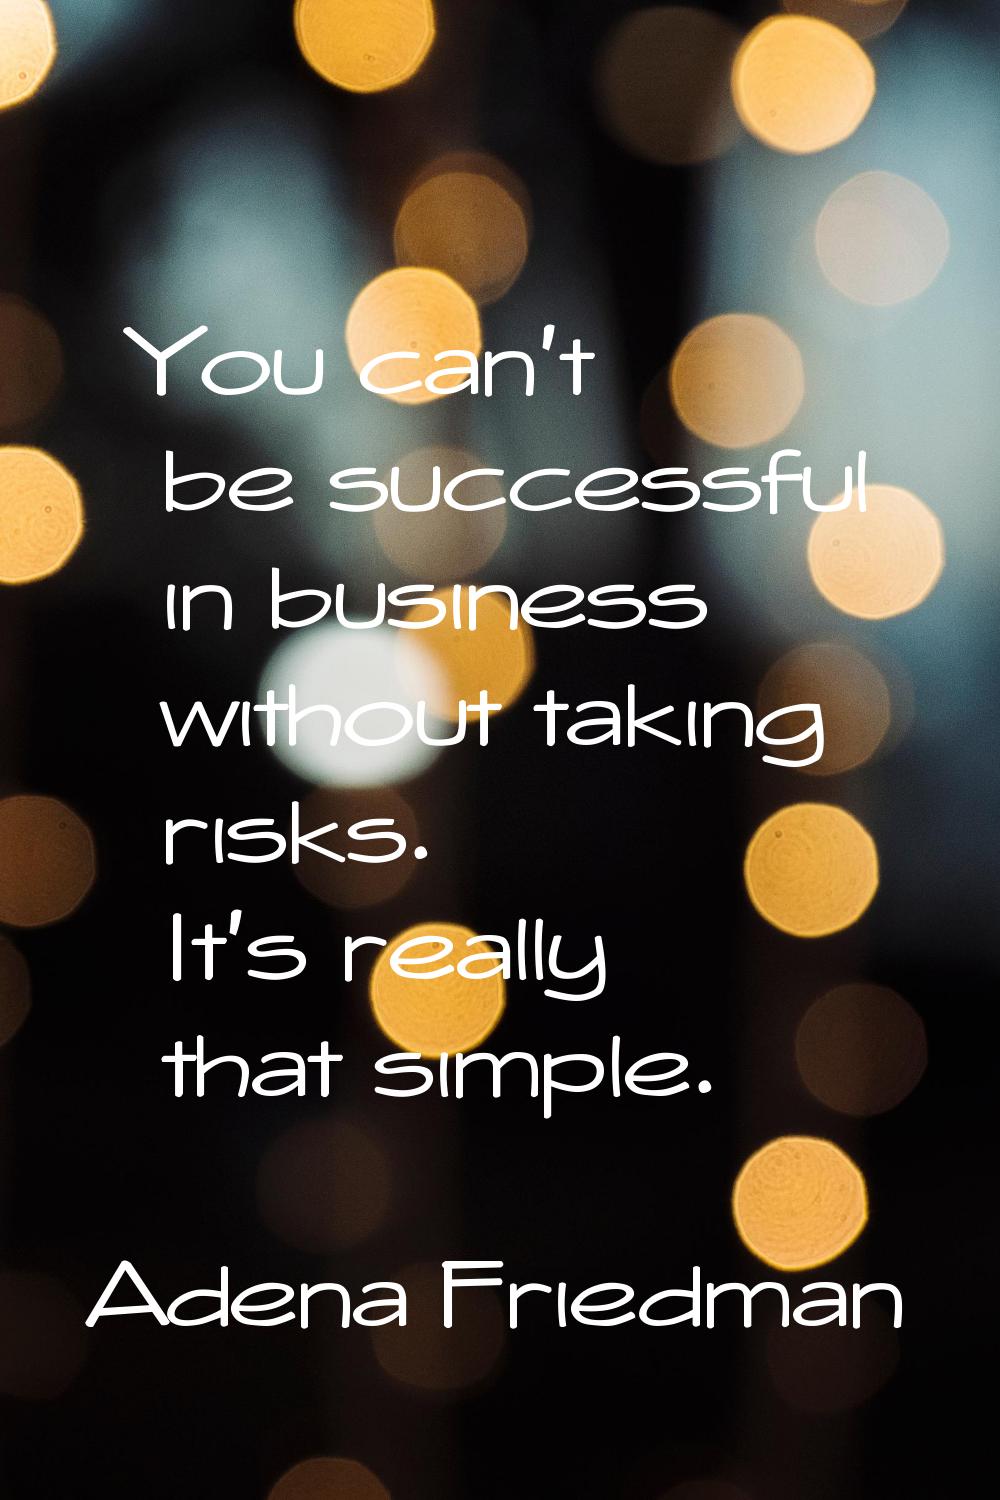 You can't be successful in business without taking risks. It's really that simple.